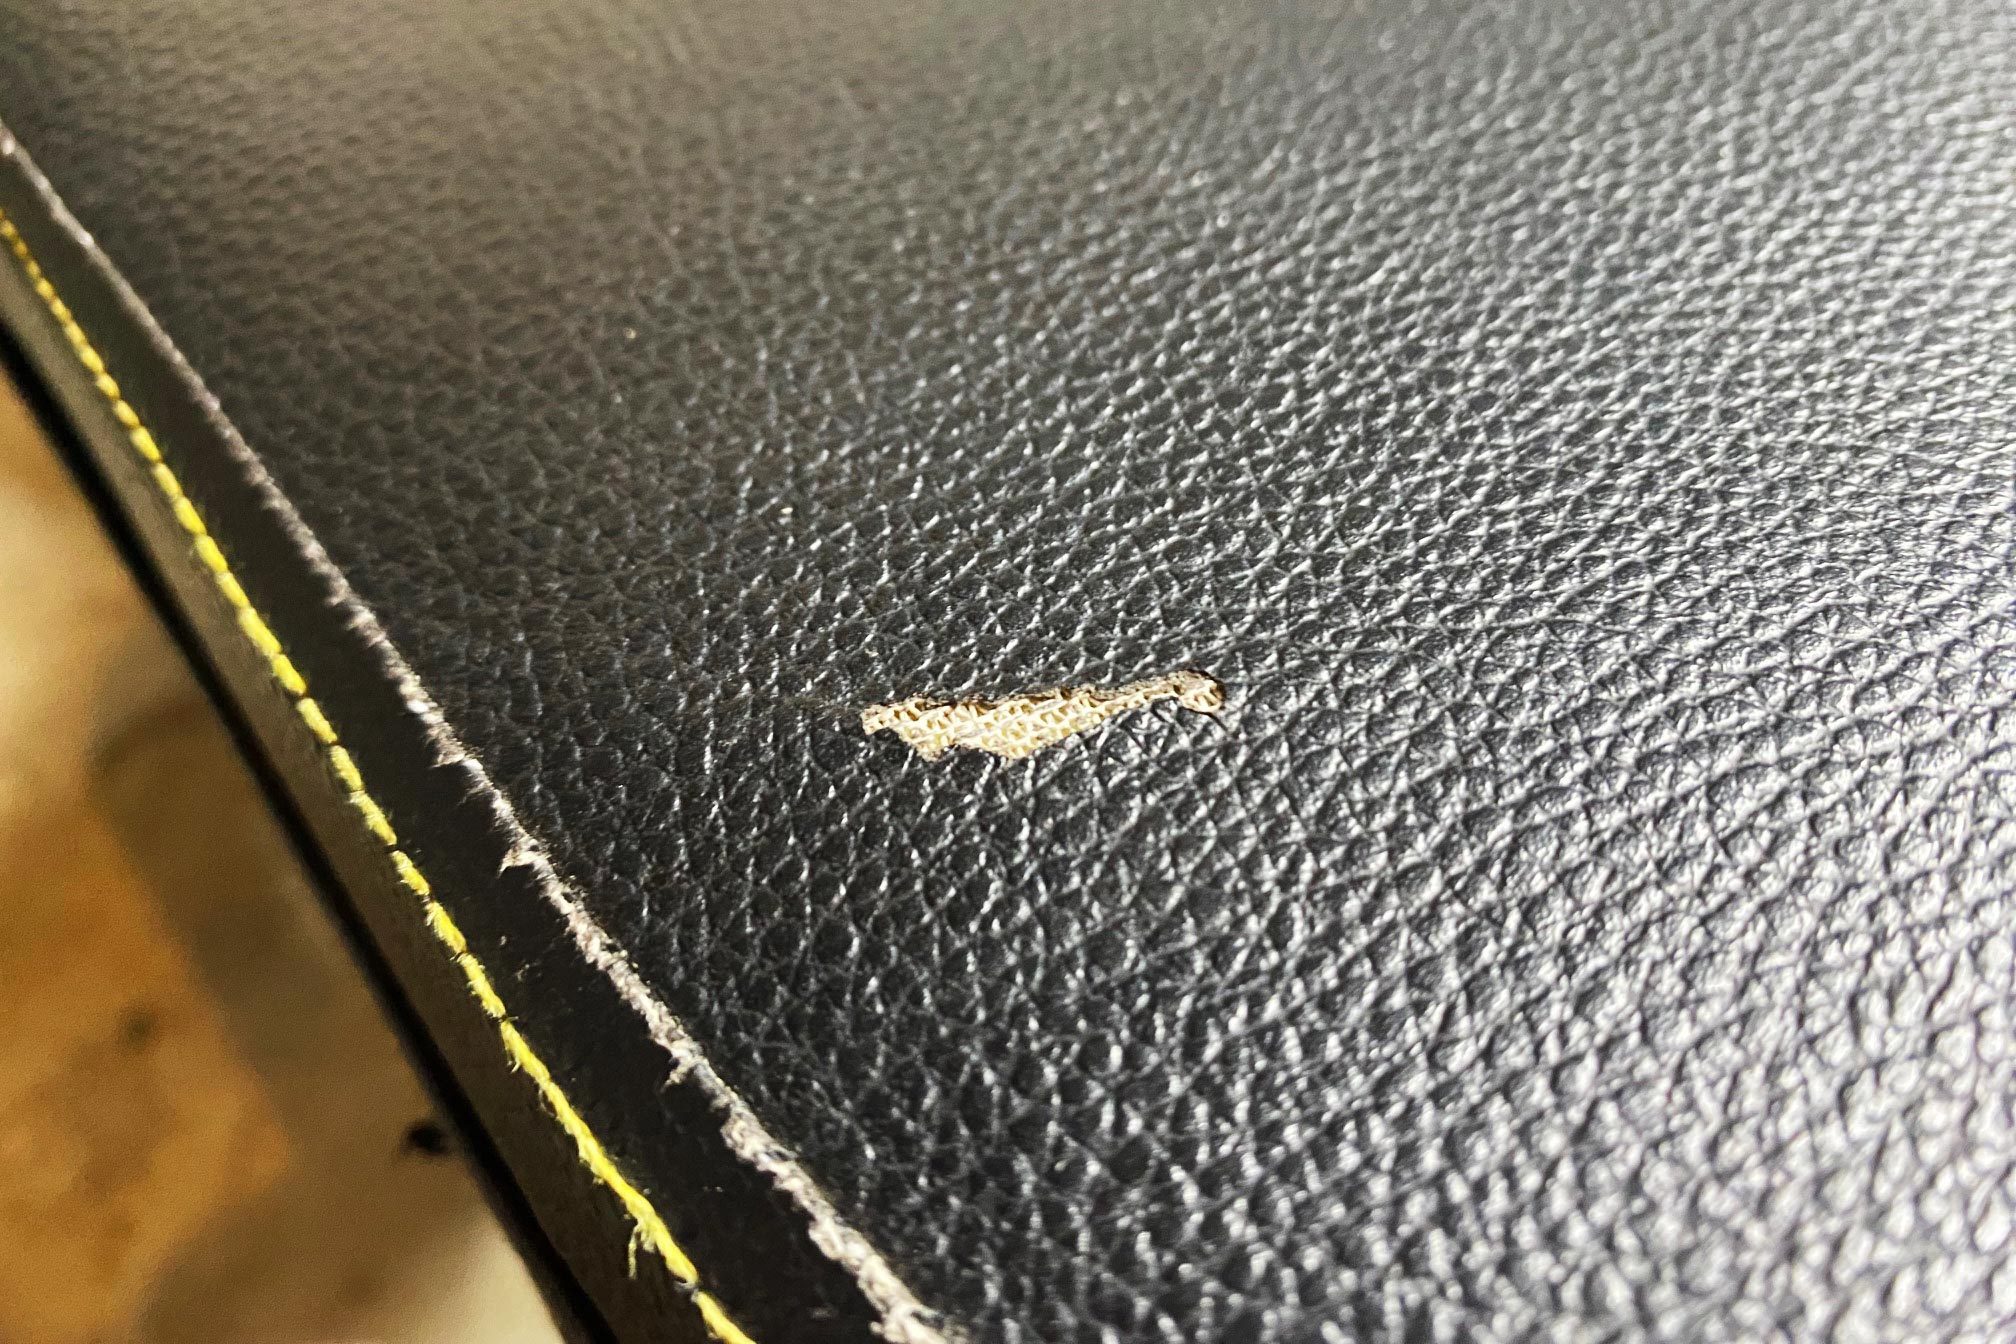 Tear in vinyl part of leather seat - Anyway to know what that